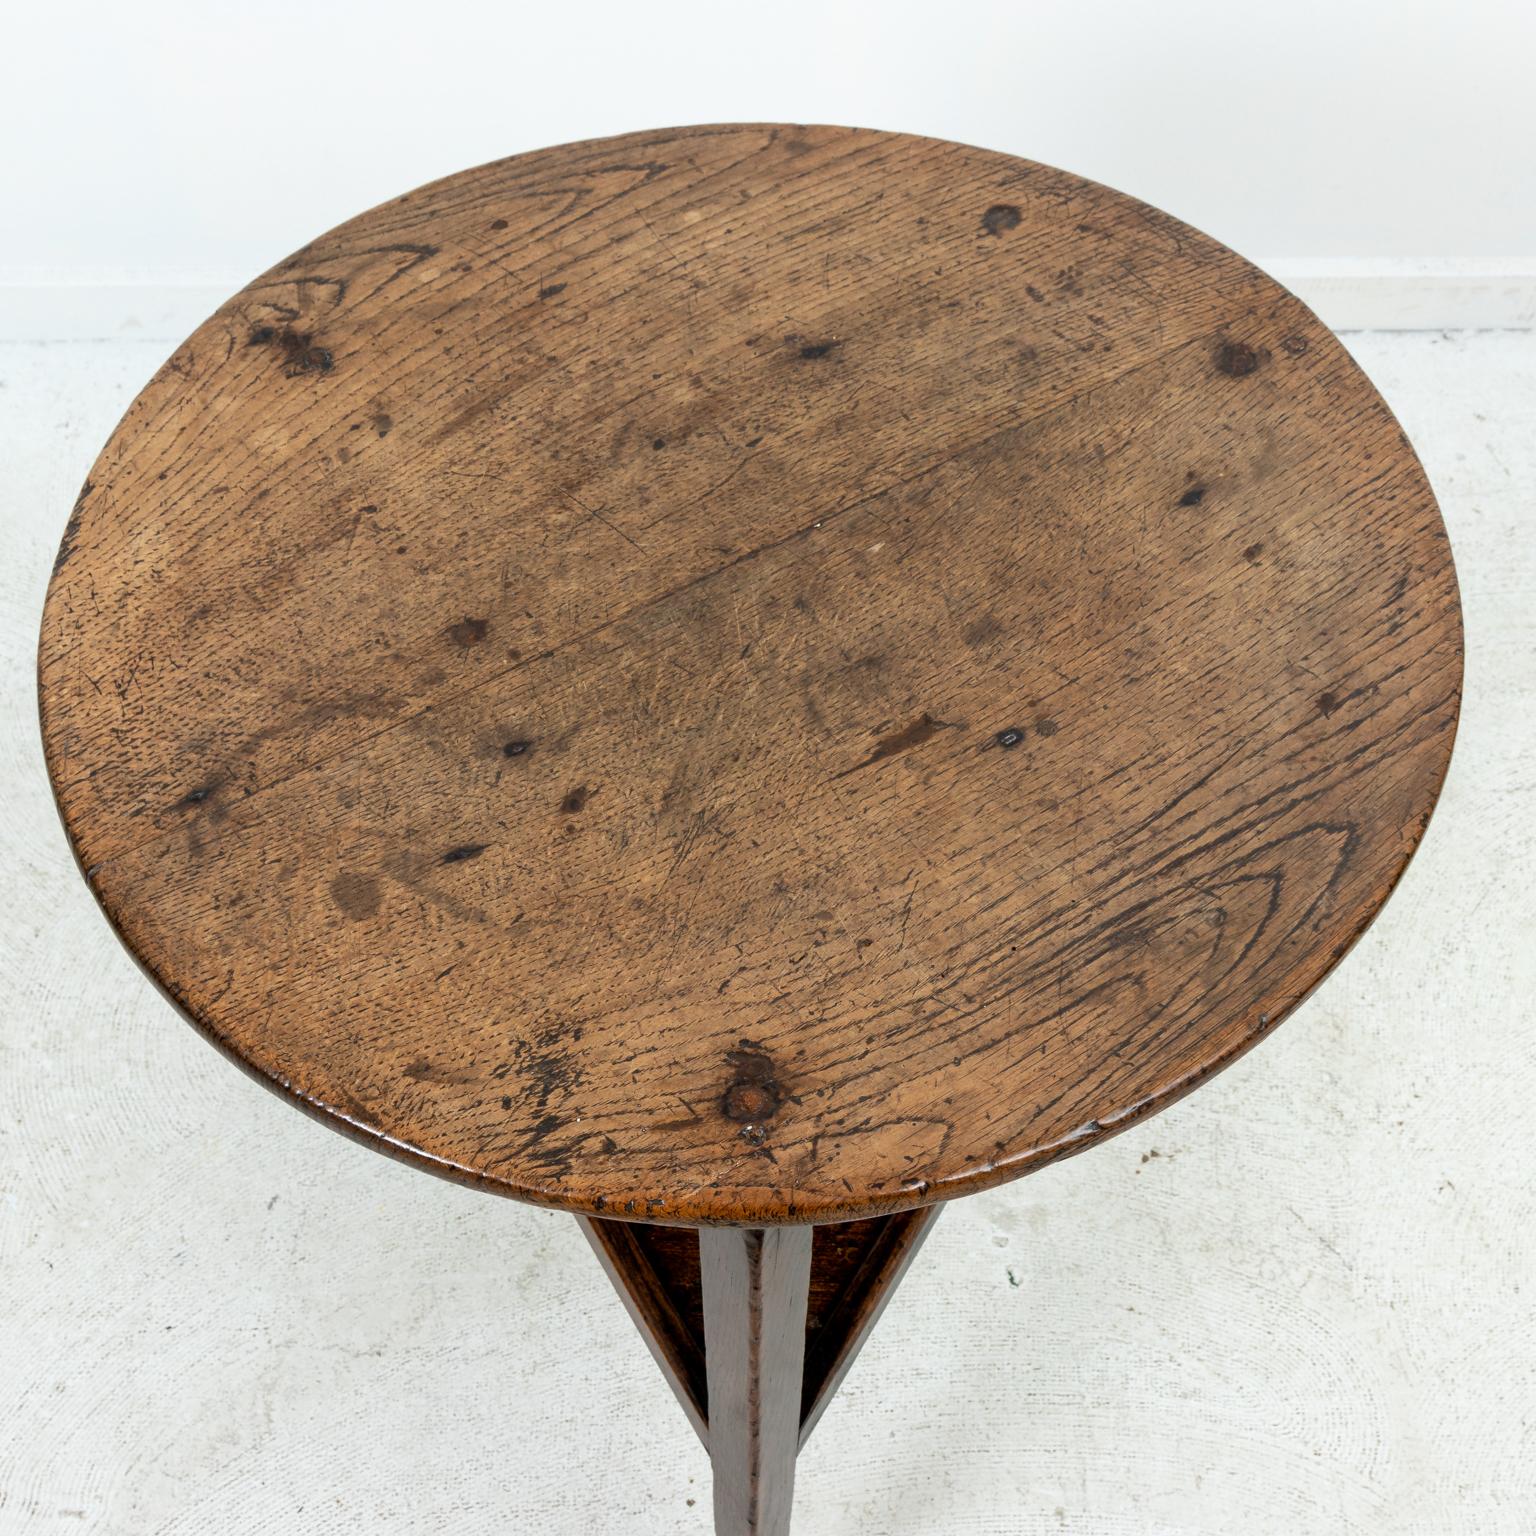 English style cricket table in a rough hewn finish, circa 18th century. The piece also features a bottom triangular shaped shelf. Please note of wear consistent with age including minor wood loss, scratches, and chips due to daily use.